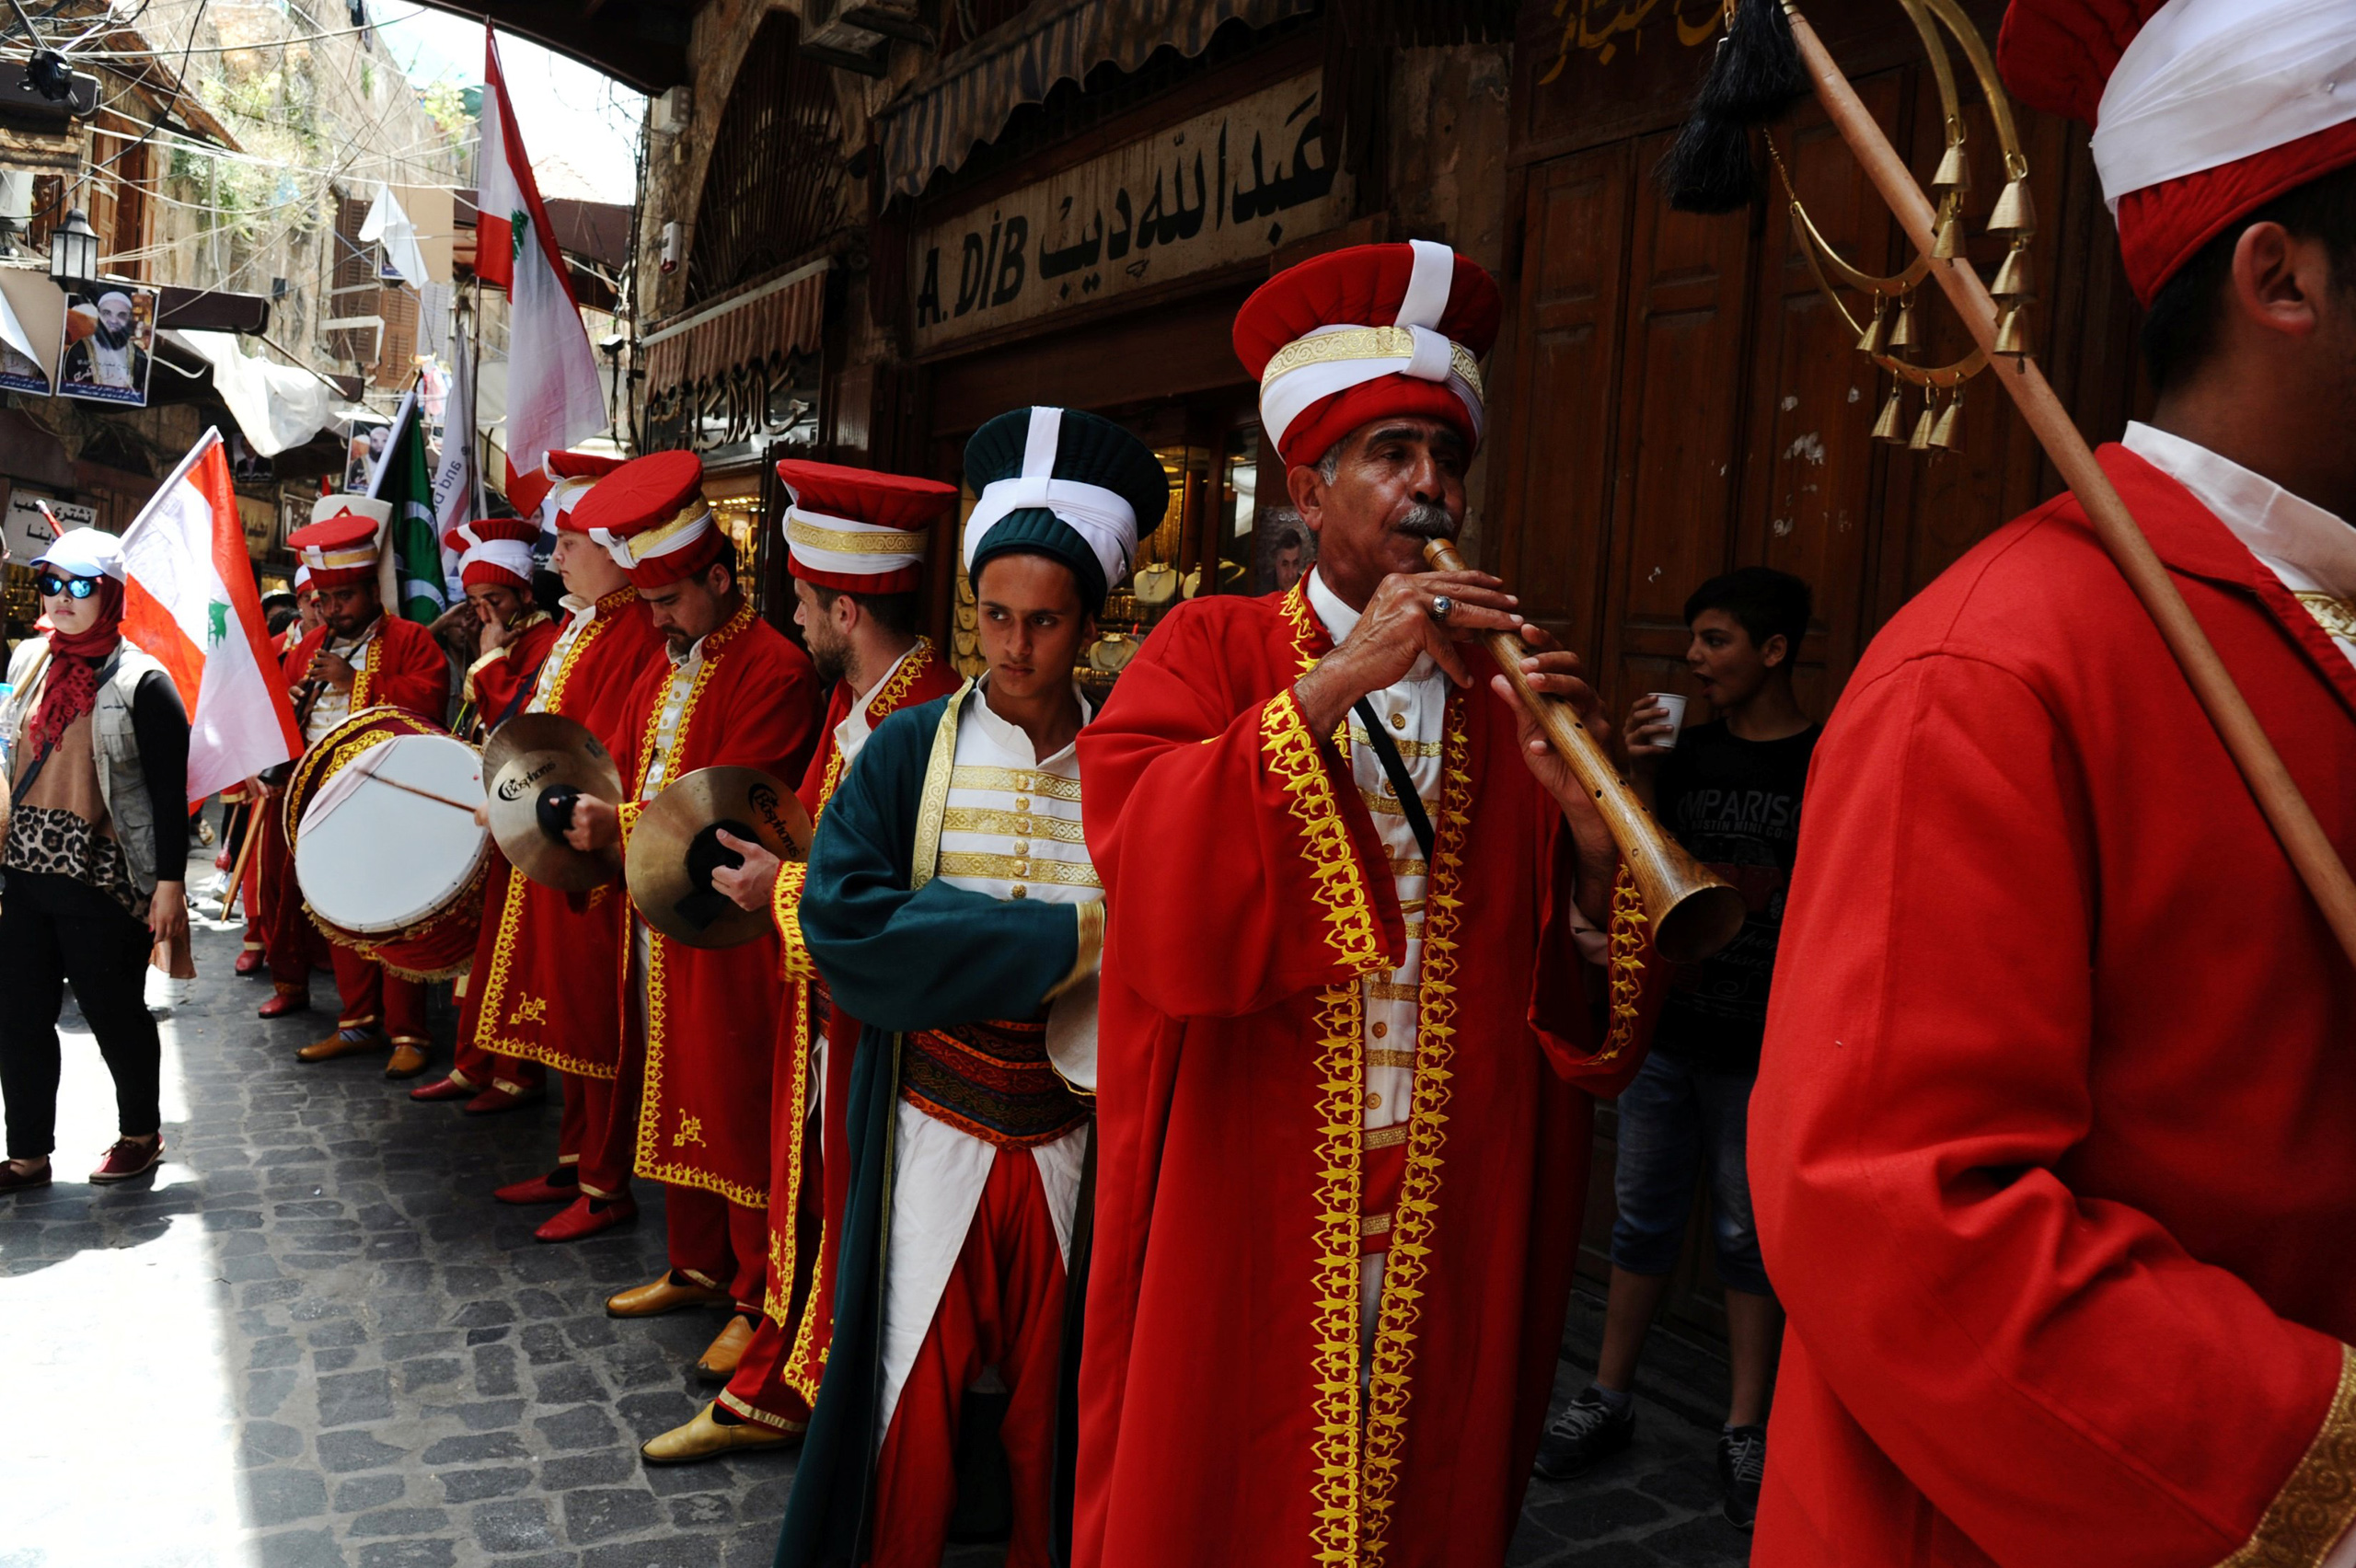 A Turkish band plays music welcoming the holy fasting month of Ramadan in Tripoli